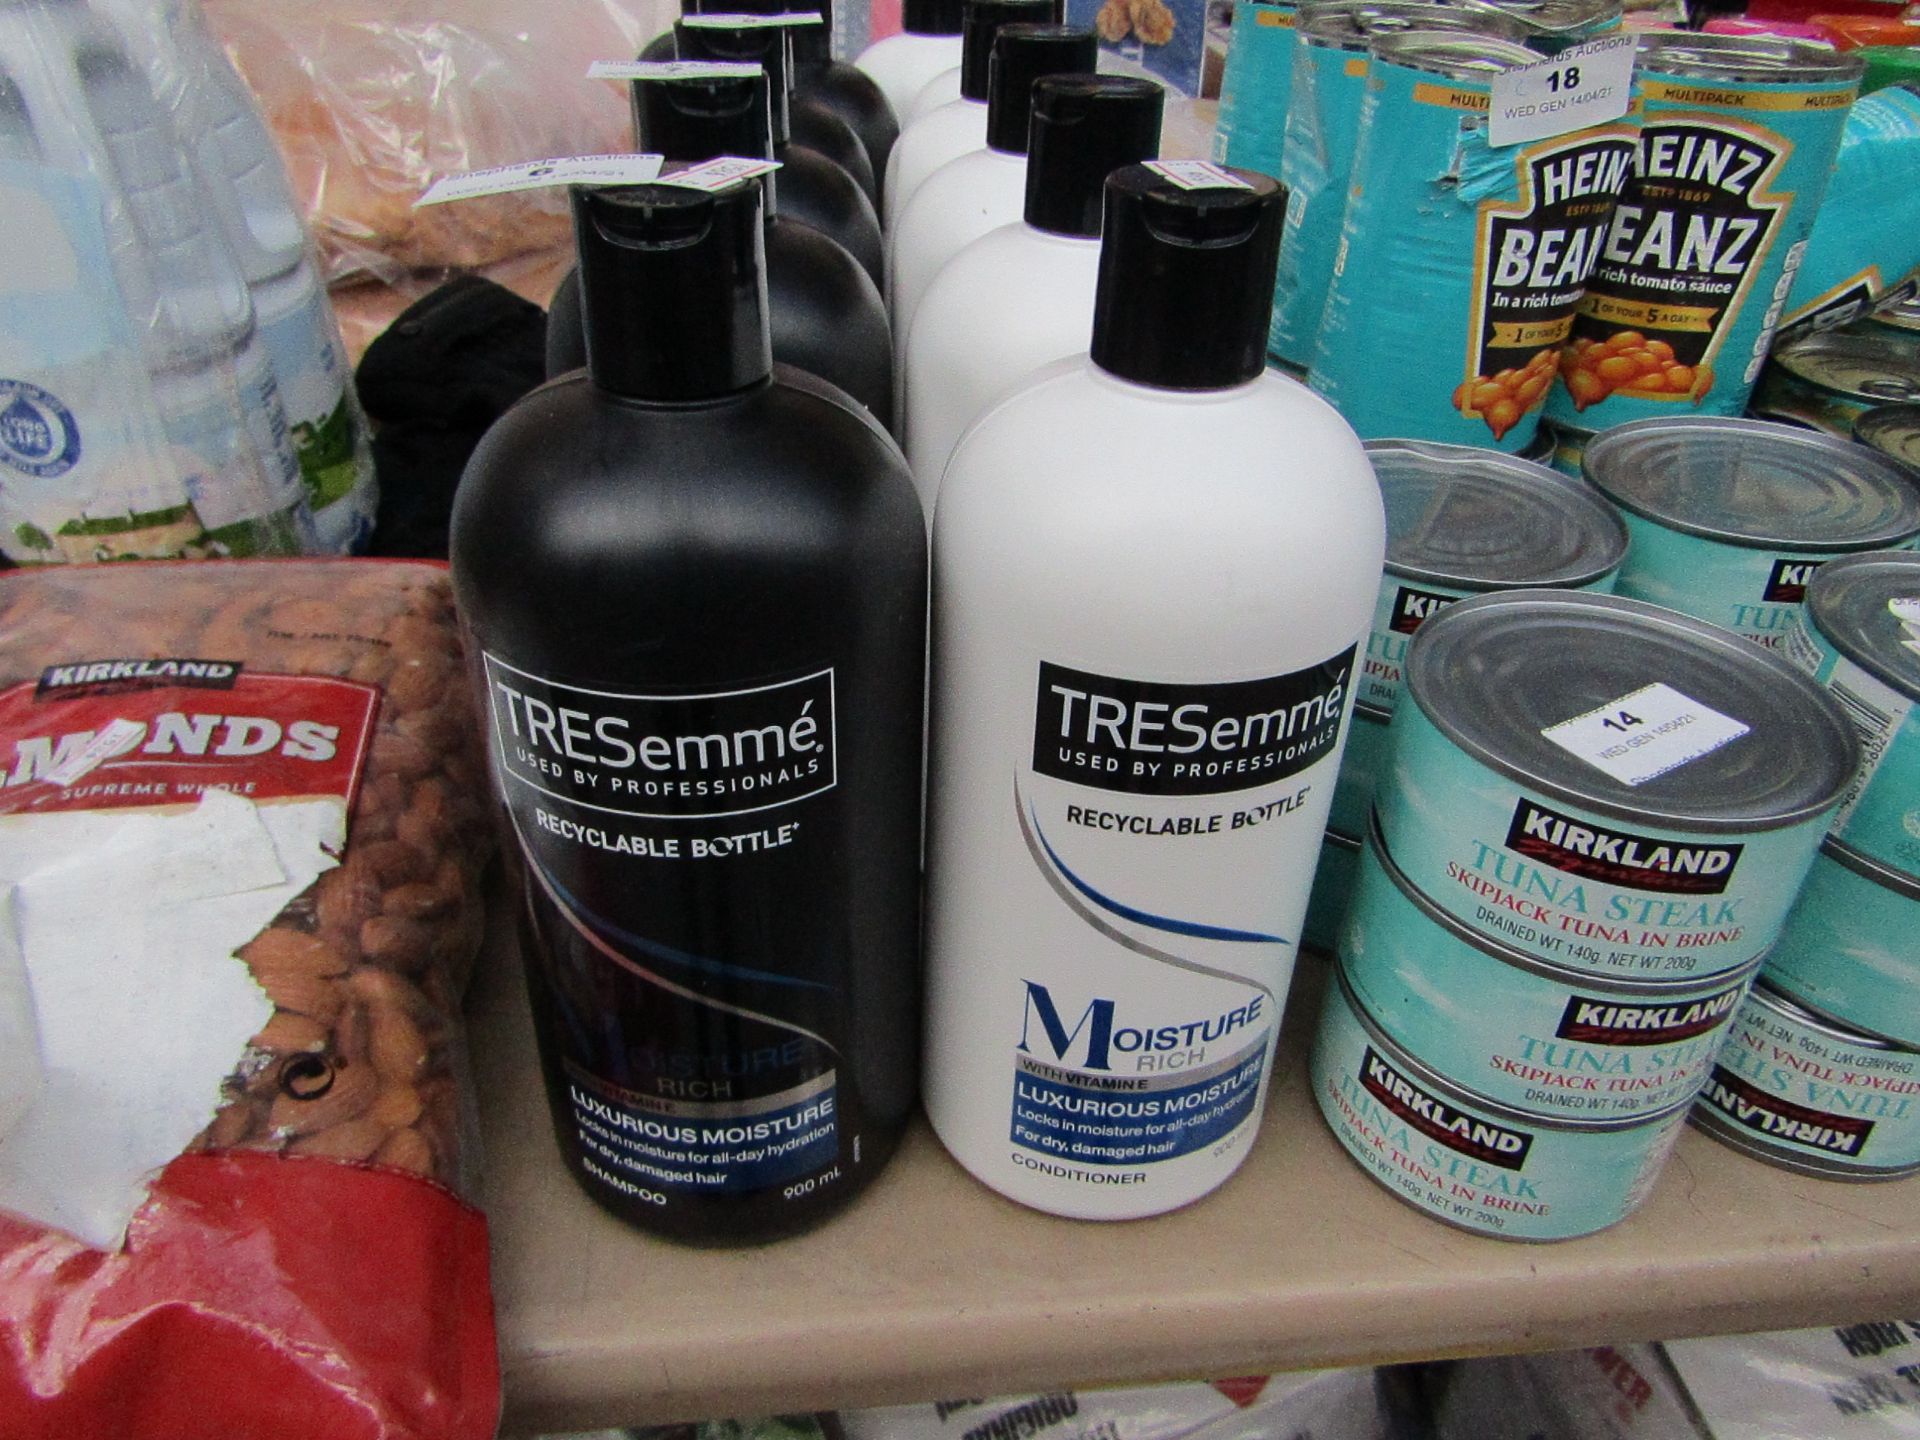 2x 900ml Bottle of Tresemme' Moisture rich, 1 is a Shampoo and the other is a Conditioner.